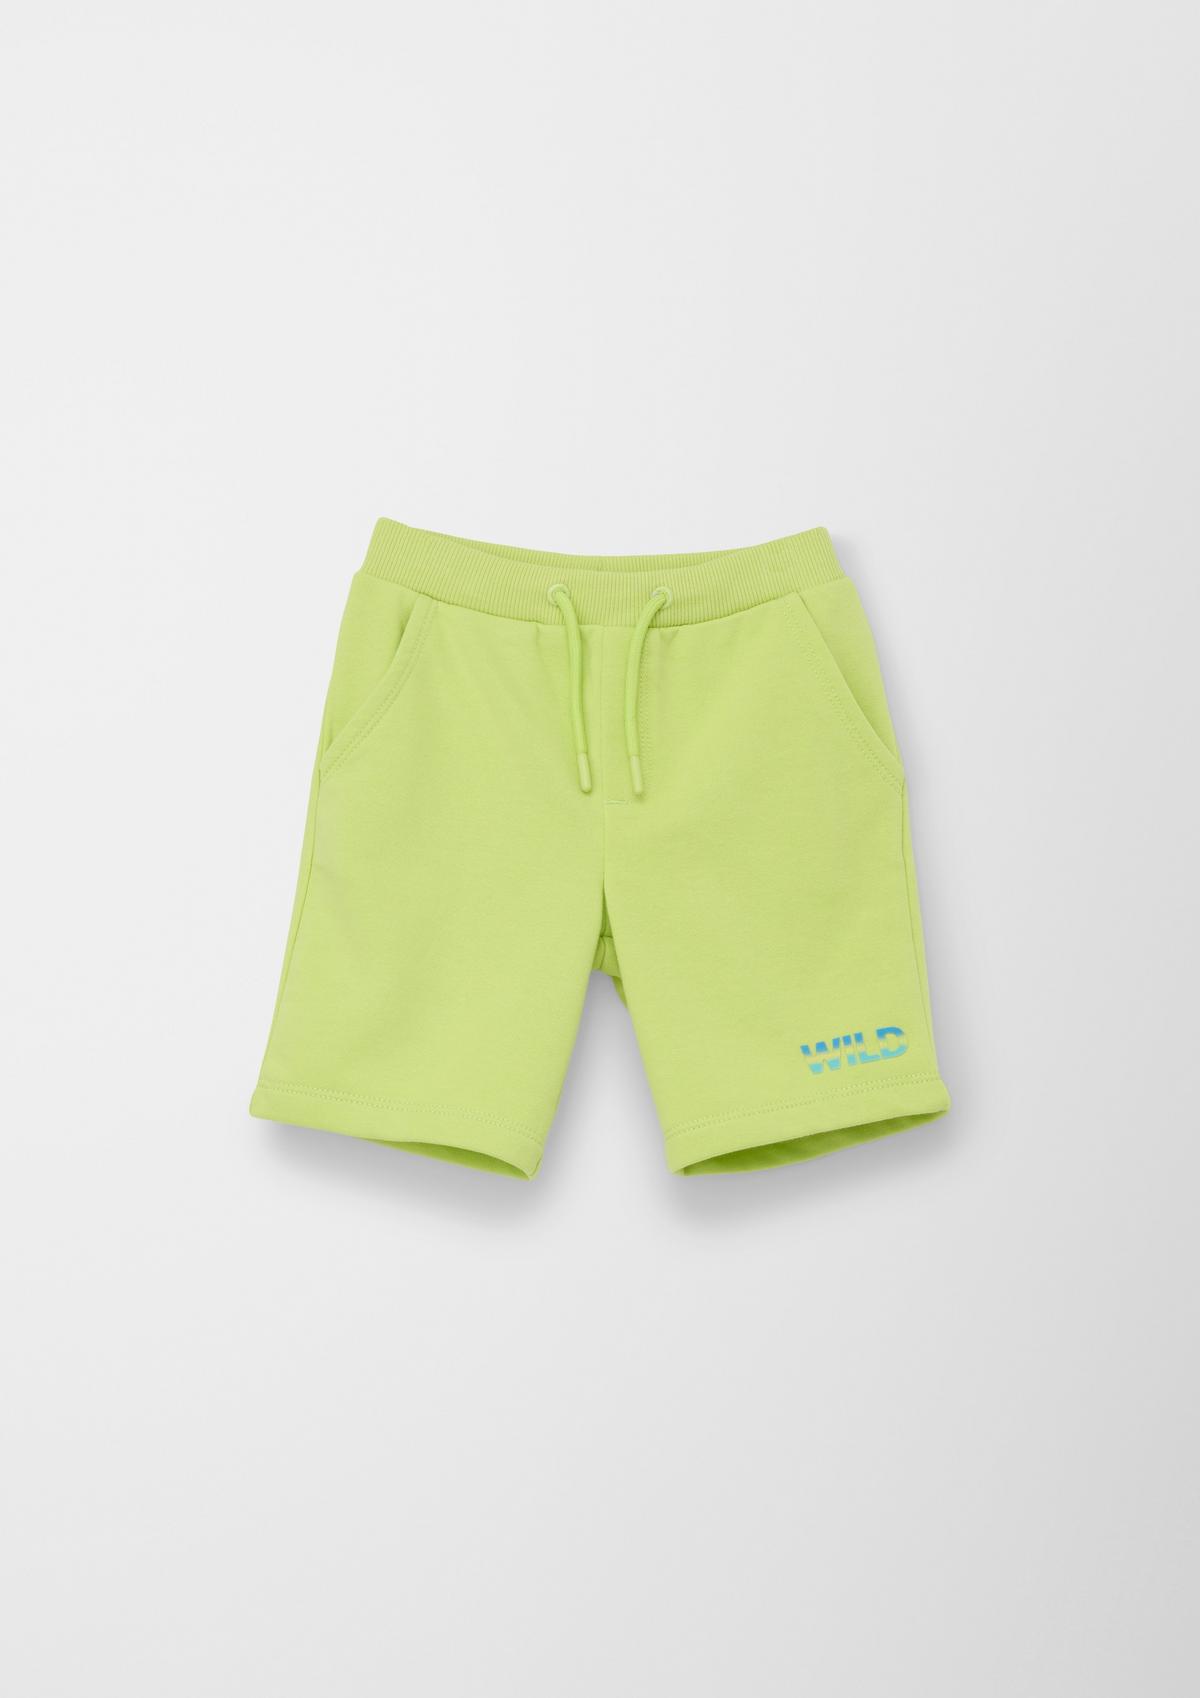 Find Bermuda shorts for boys teens and online